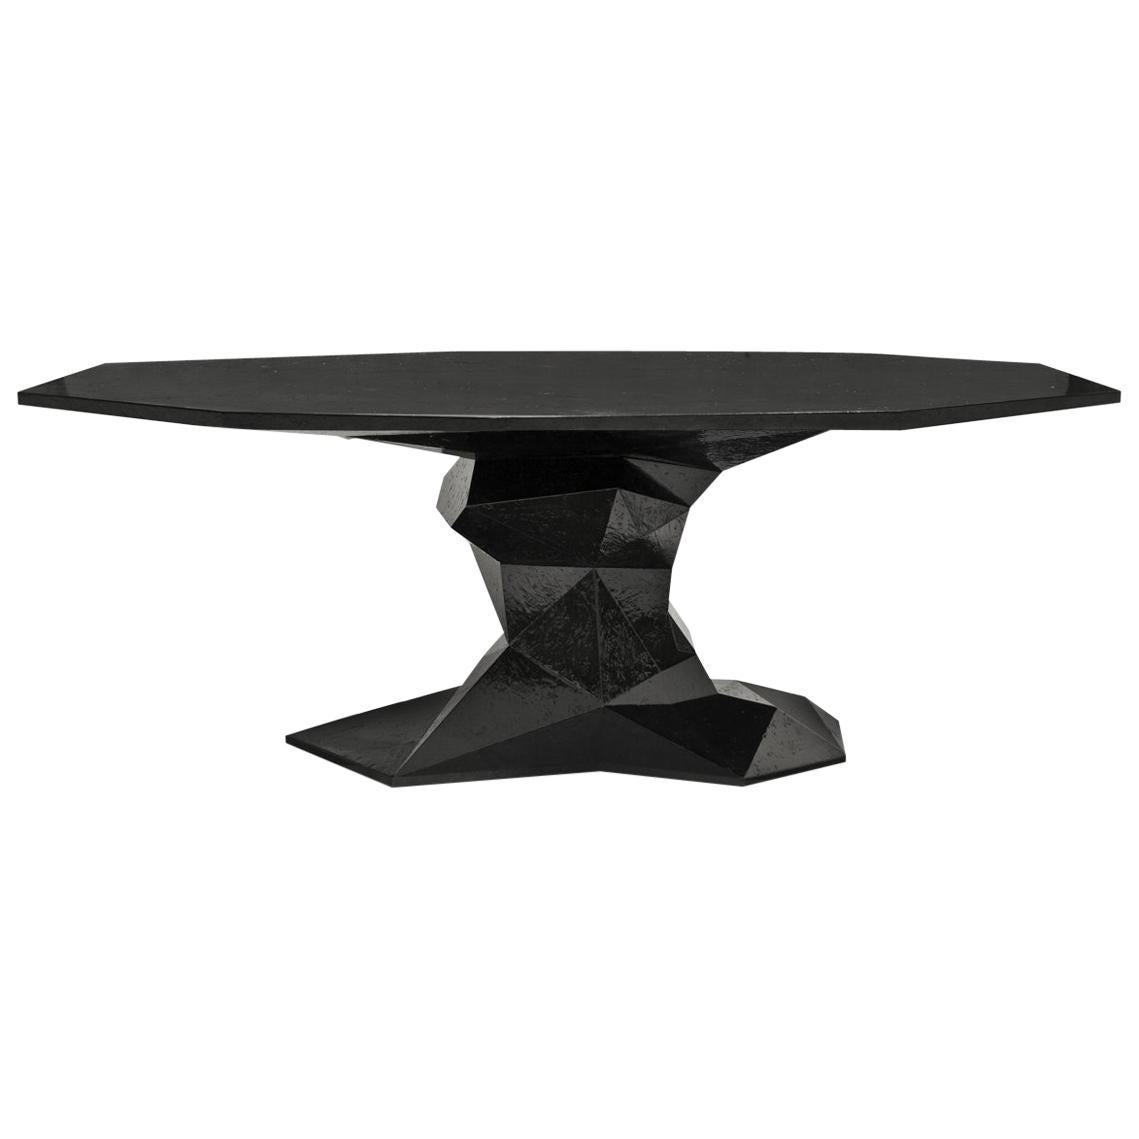 Jungle Black Dining Table Glossy Black Lacquered Wood For Sale